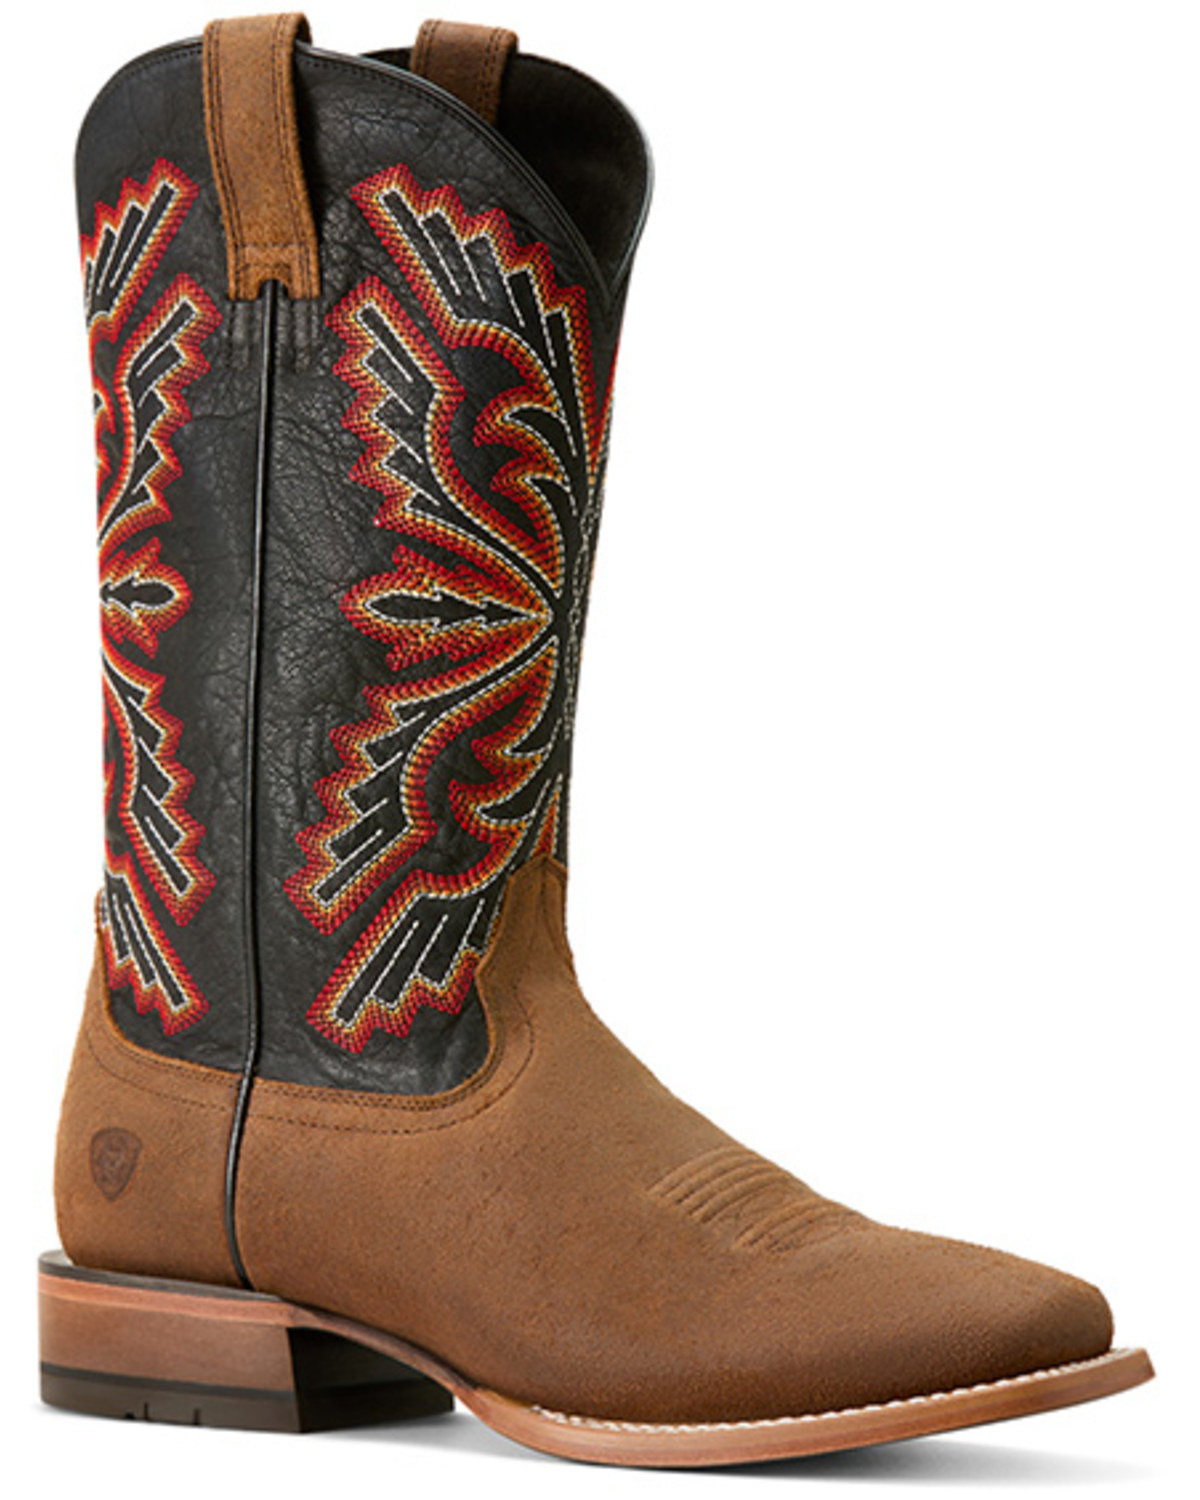 Ariat Men's Sting Roughout Western Boots - Broad Square Toe